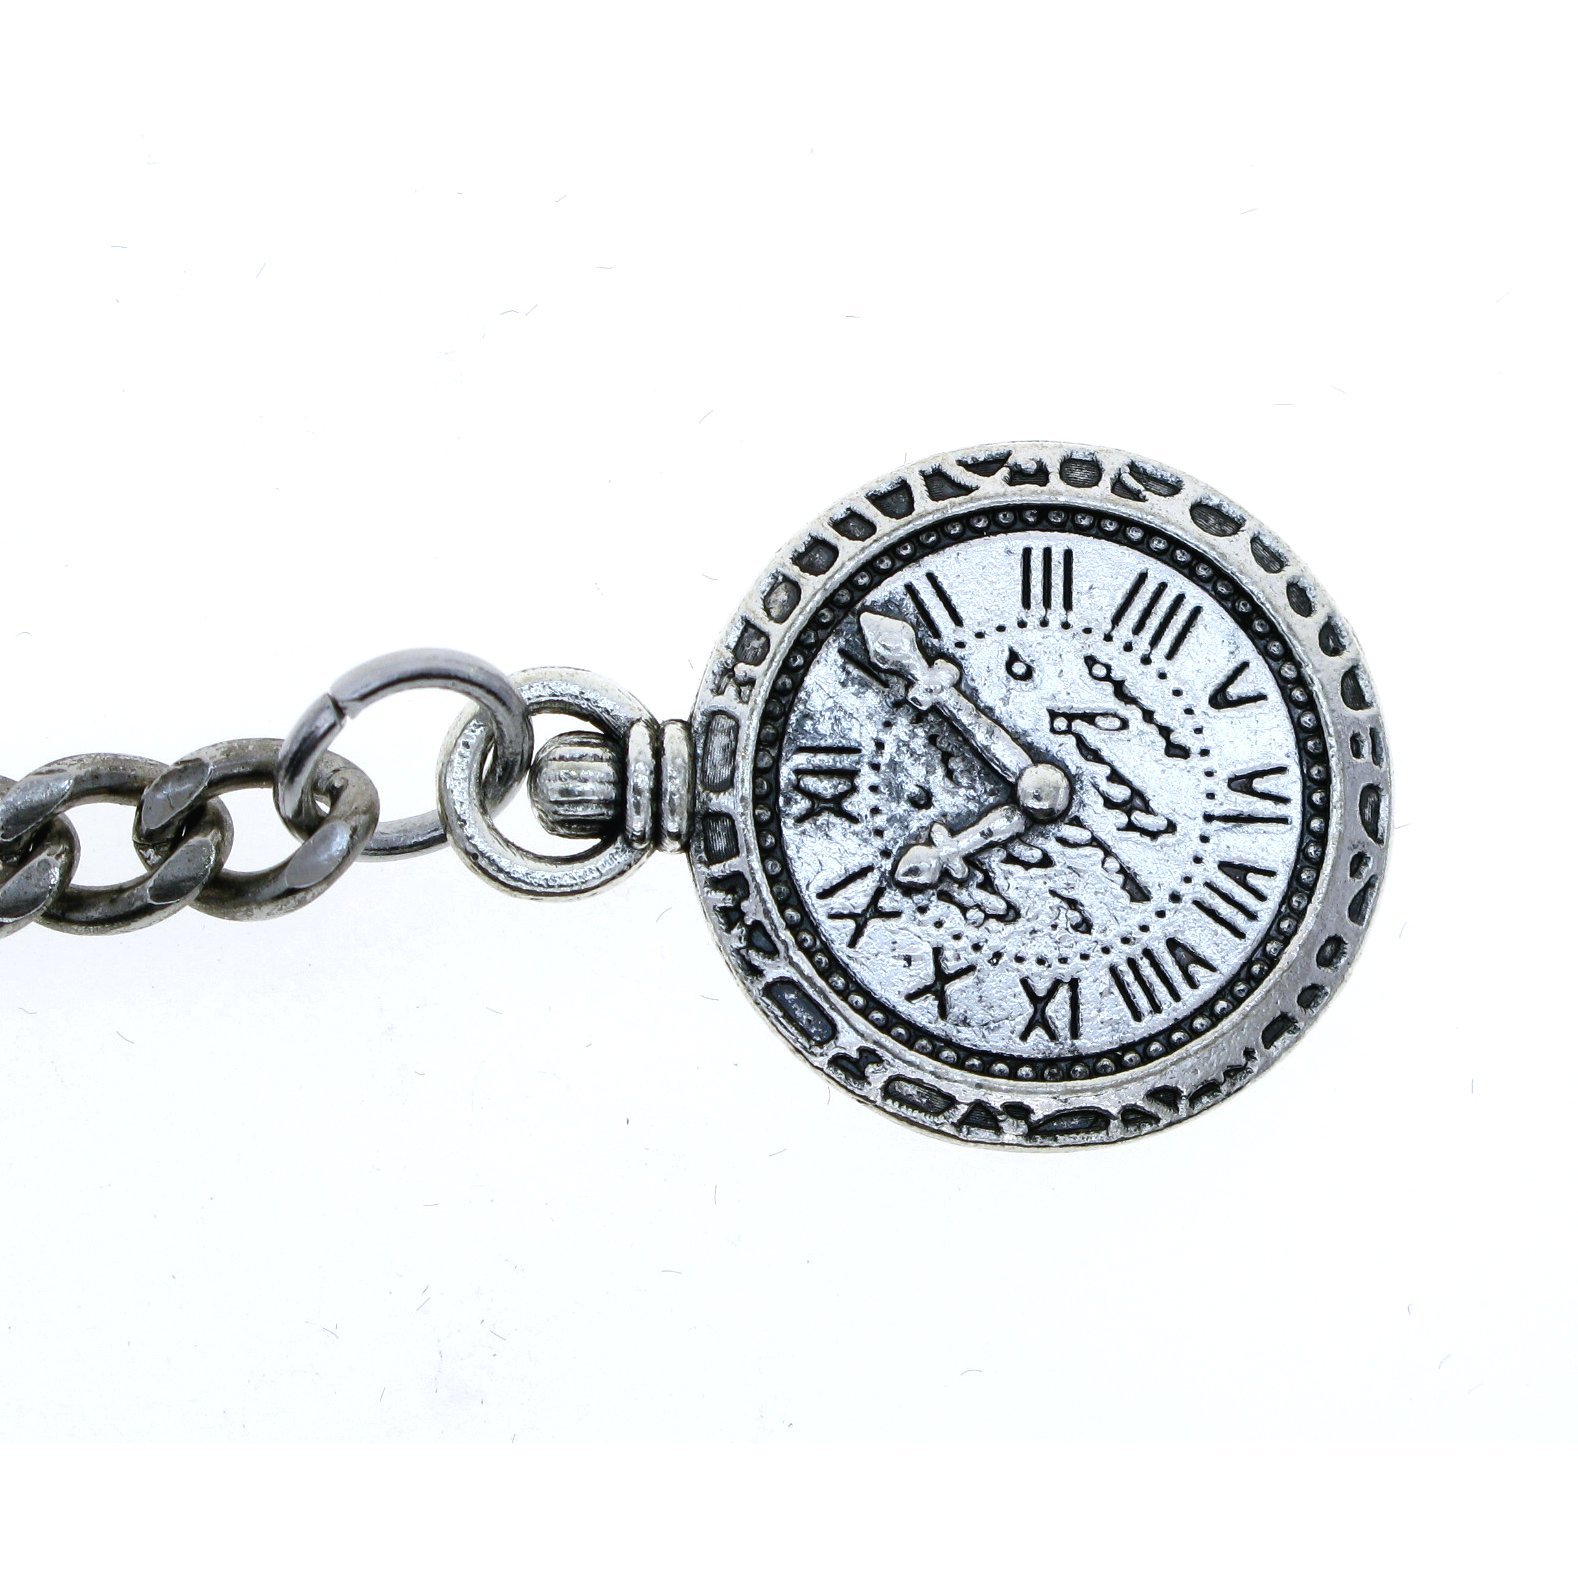 Albert Chain Silver Color Pocket Watch Chains for Men with Mini Pocket Watch Design Fob T Bar AC36